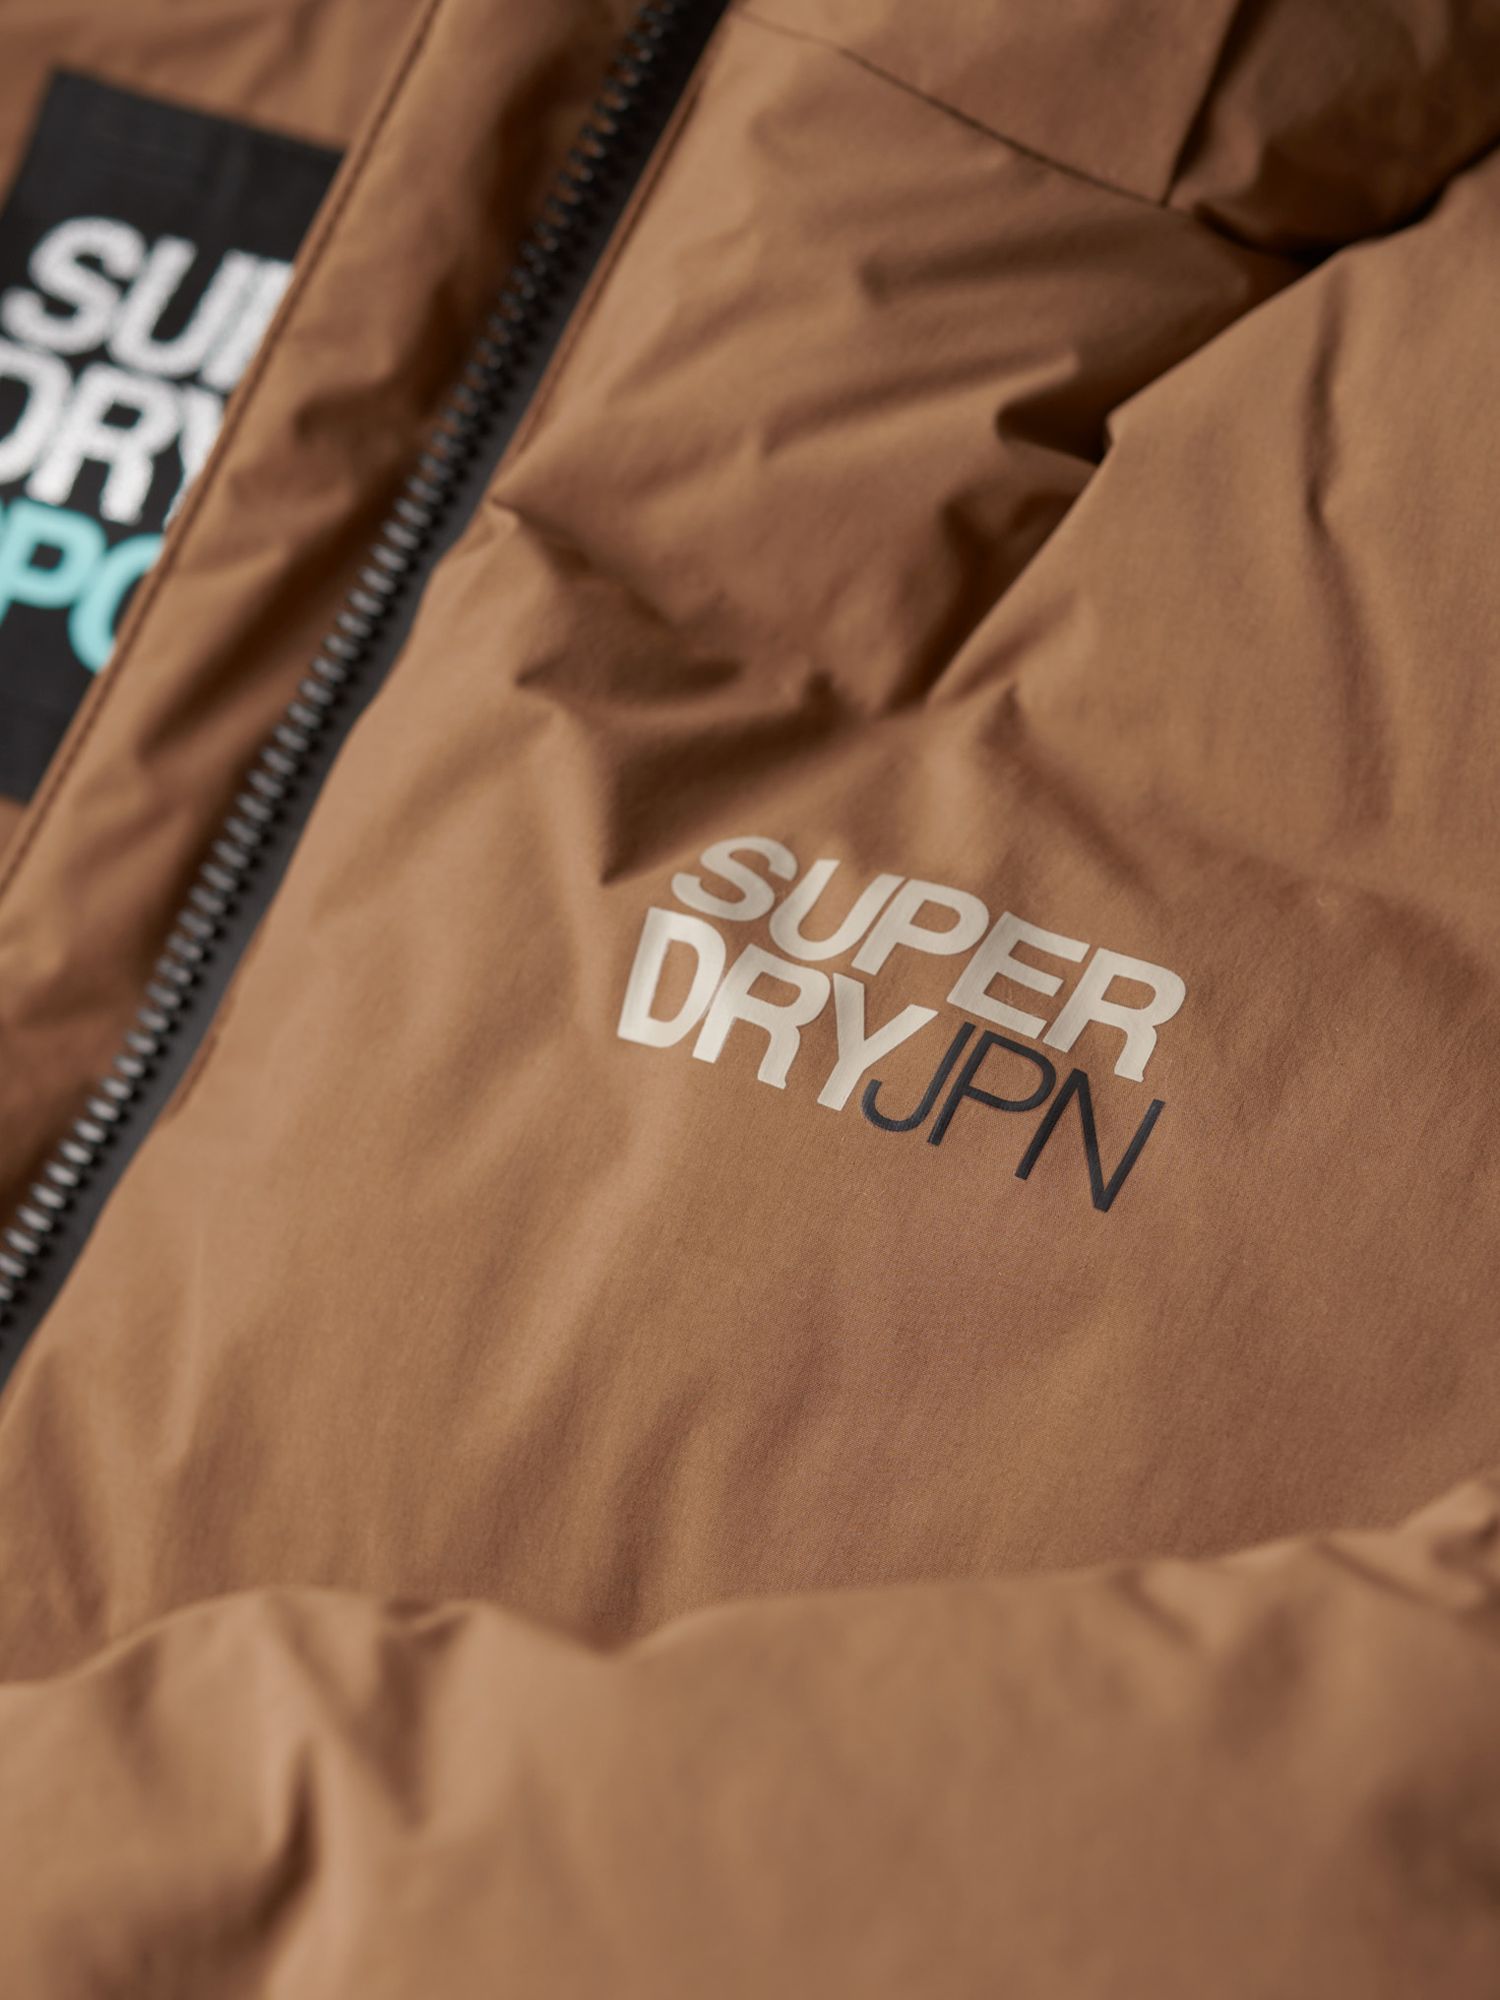 Buy Superdry Hooded Boxy Puffer Jacket Online at johnlewis.com